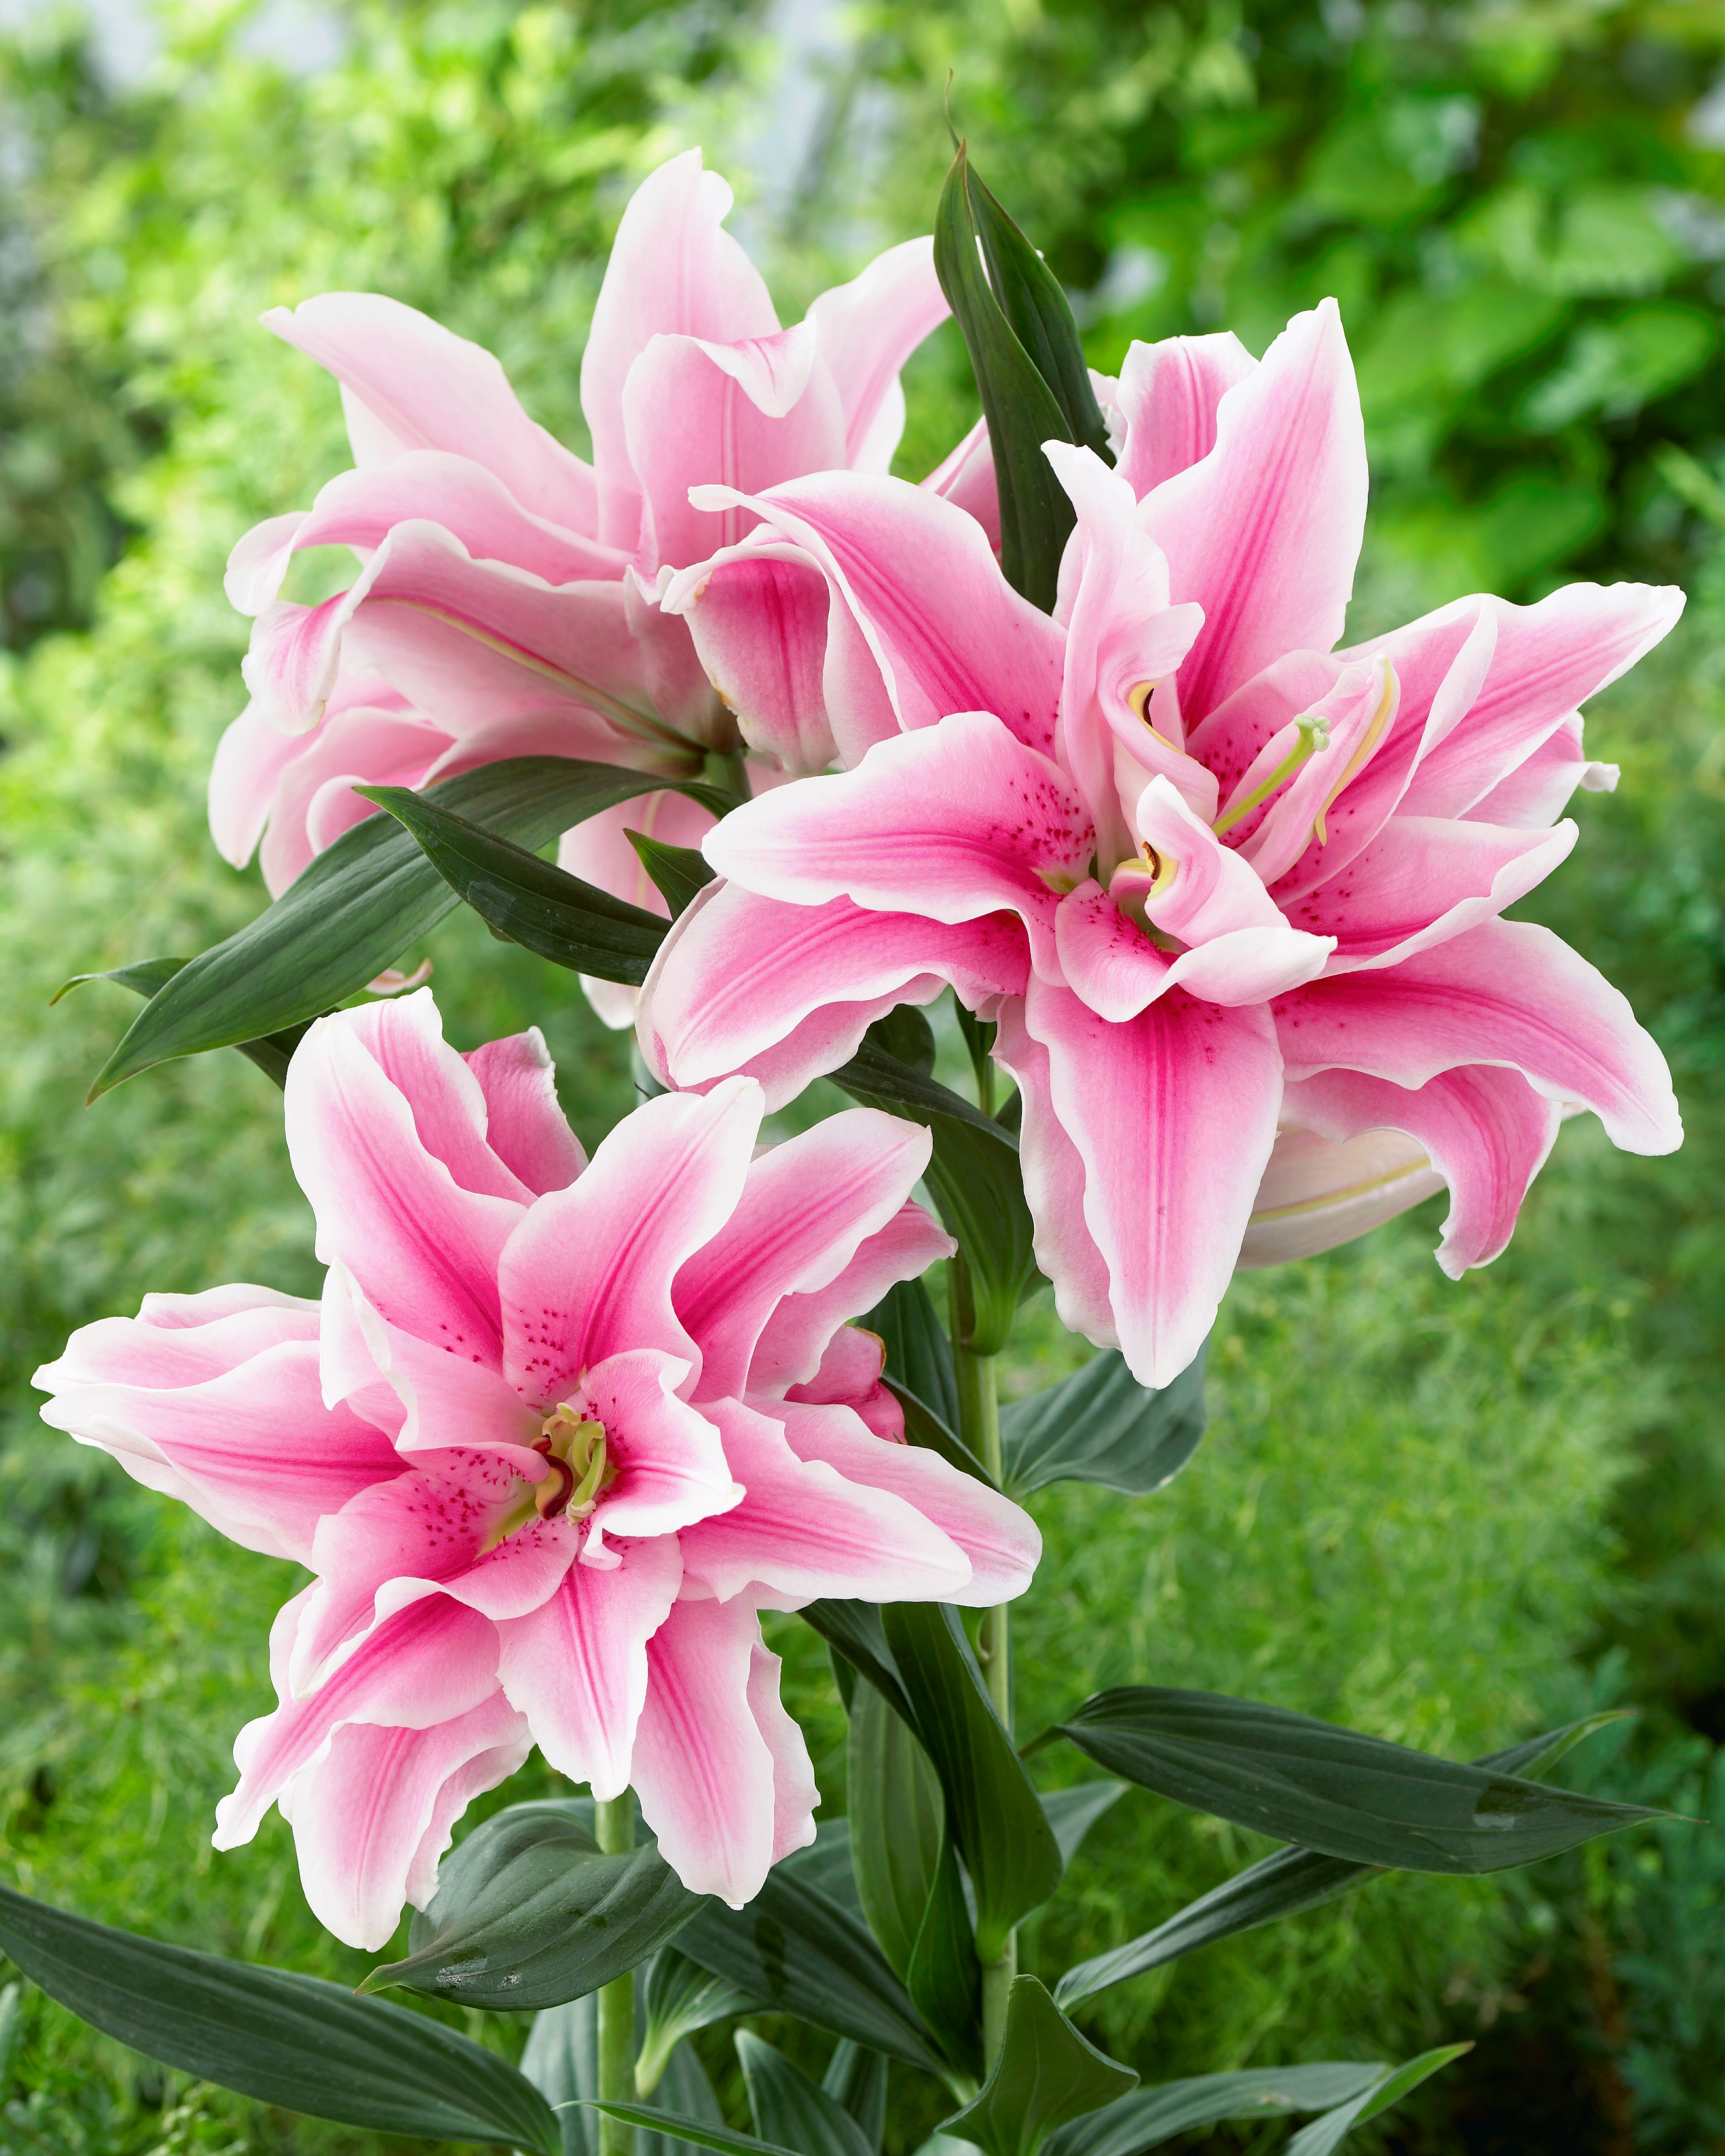 visi78662-roselily-belonica-tuin